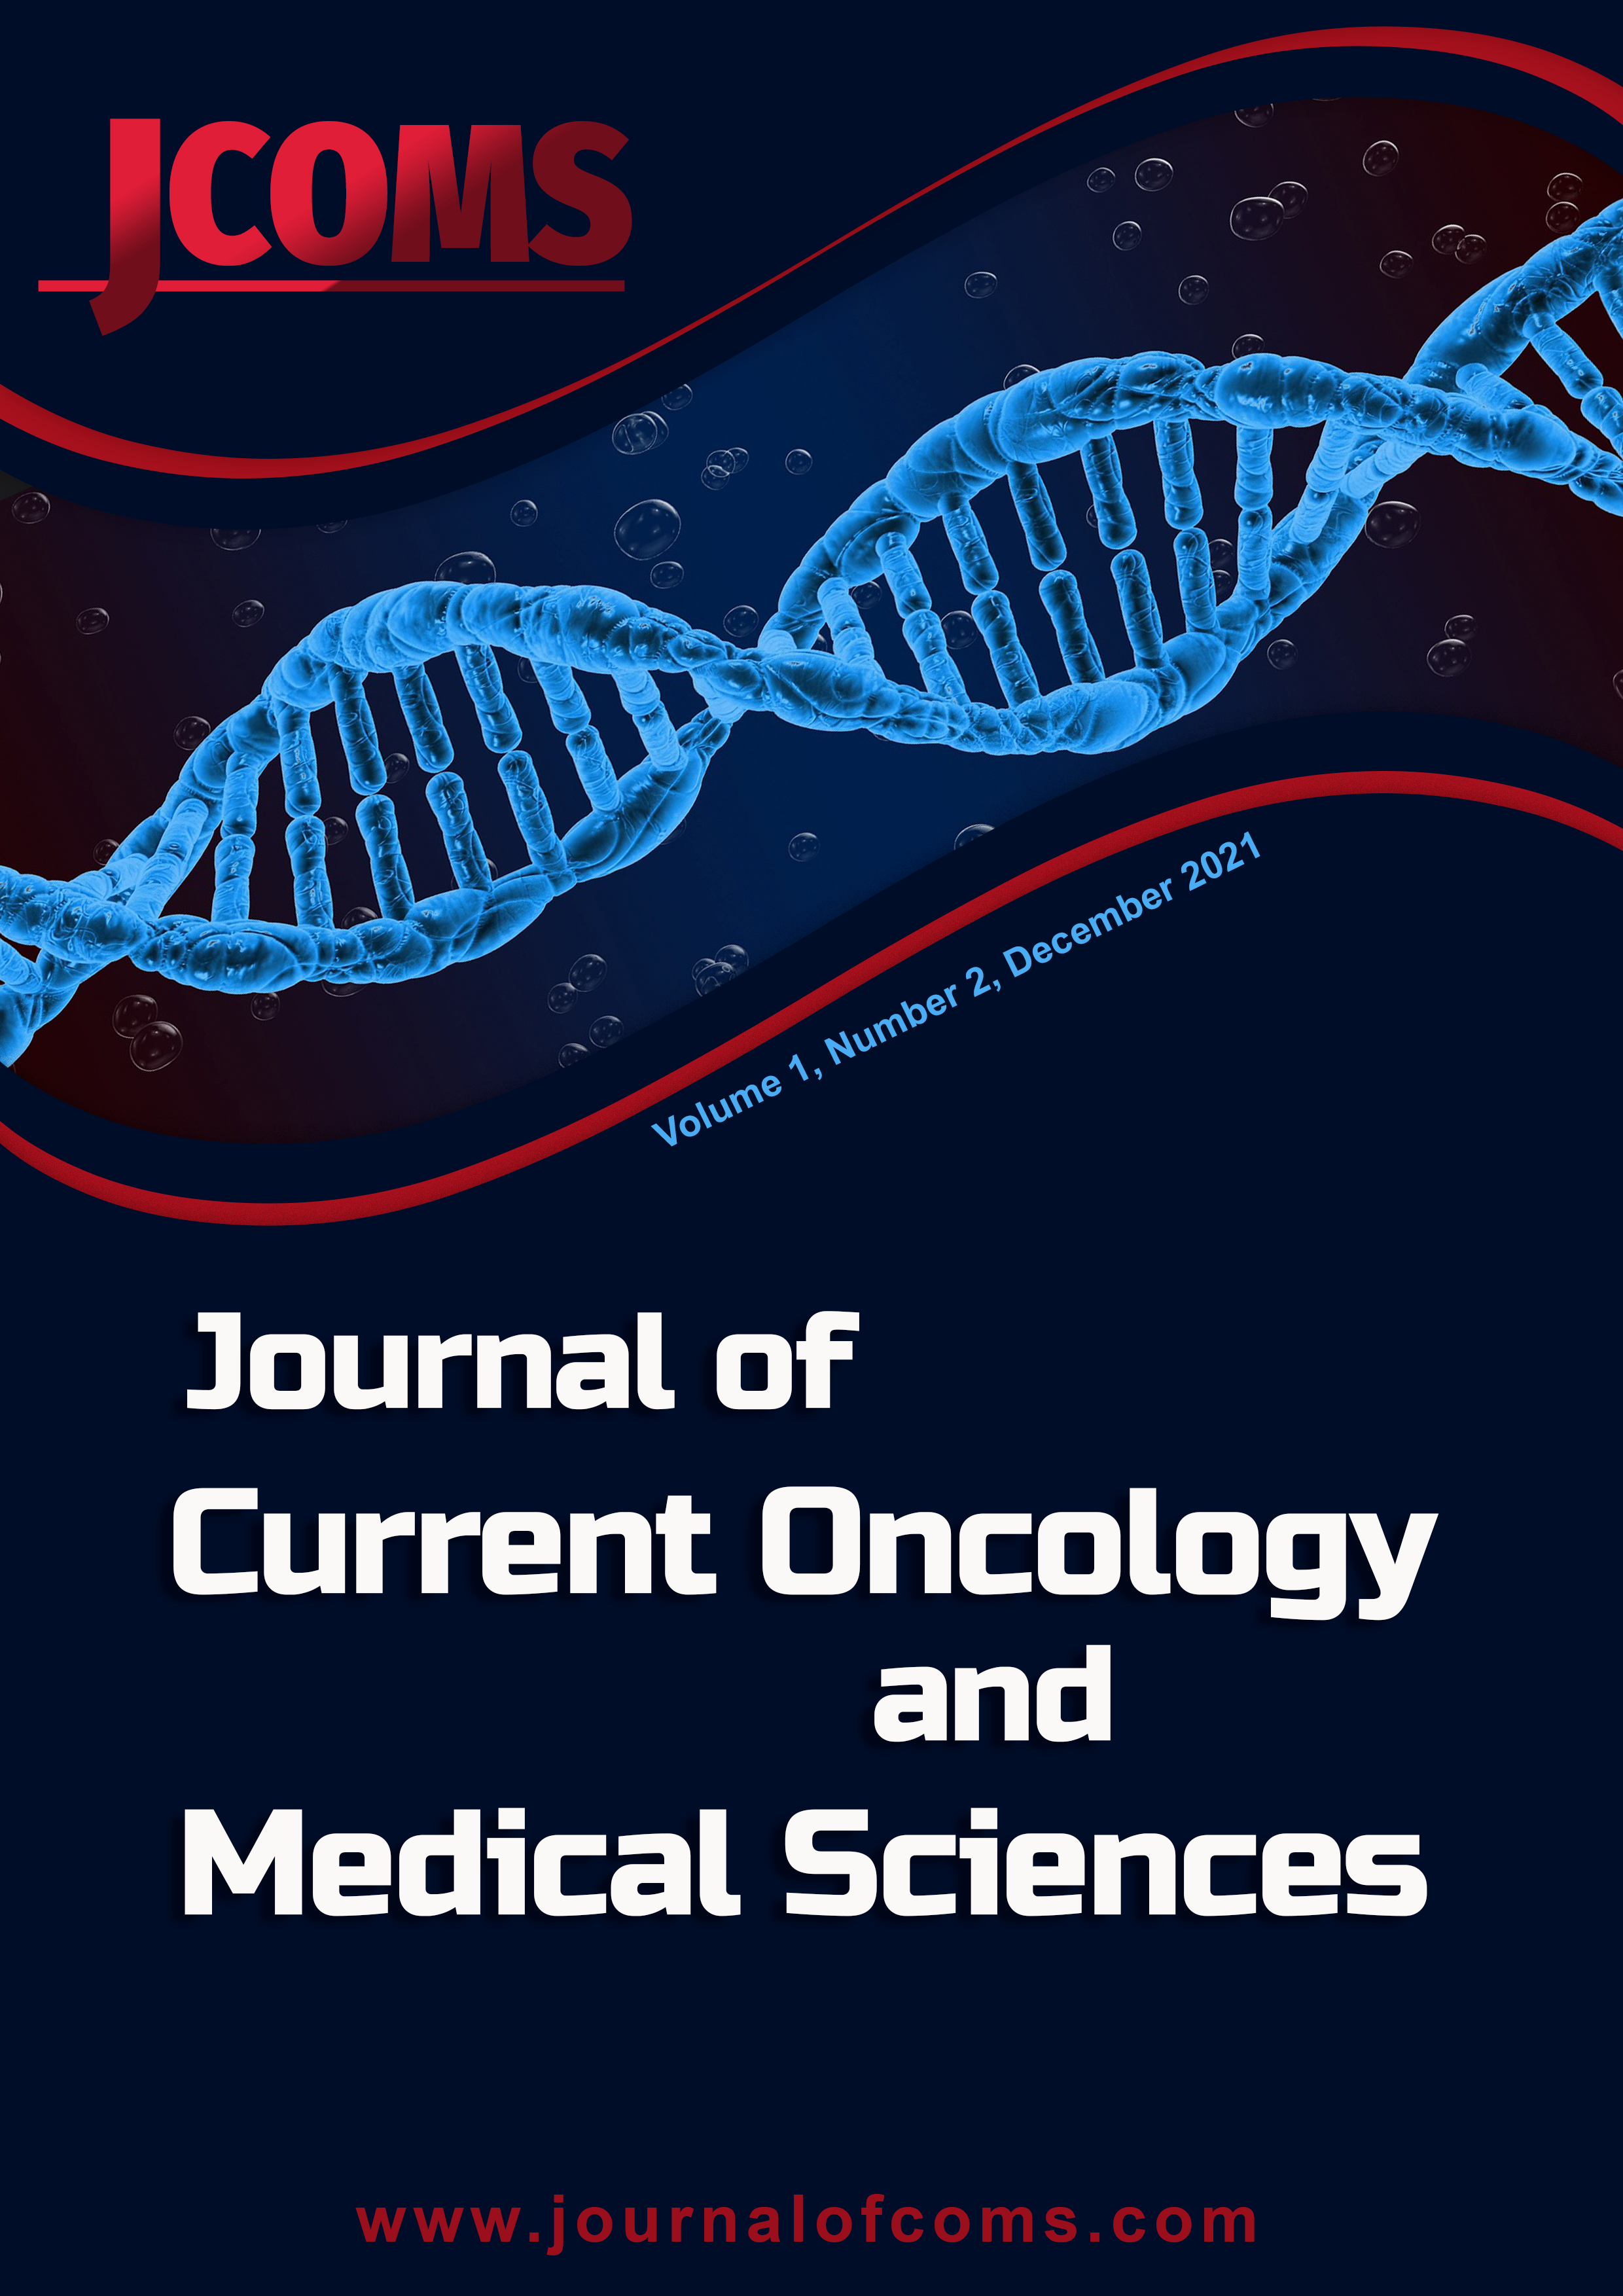 Journal of Current Oncology and Medical Sciences